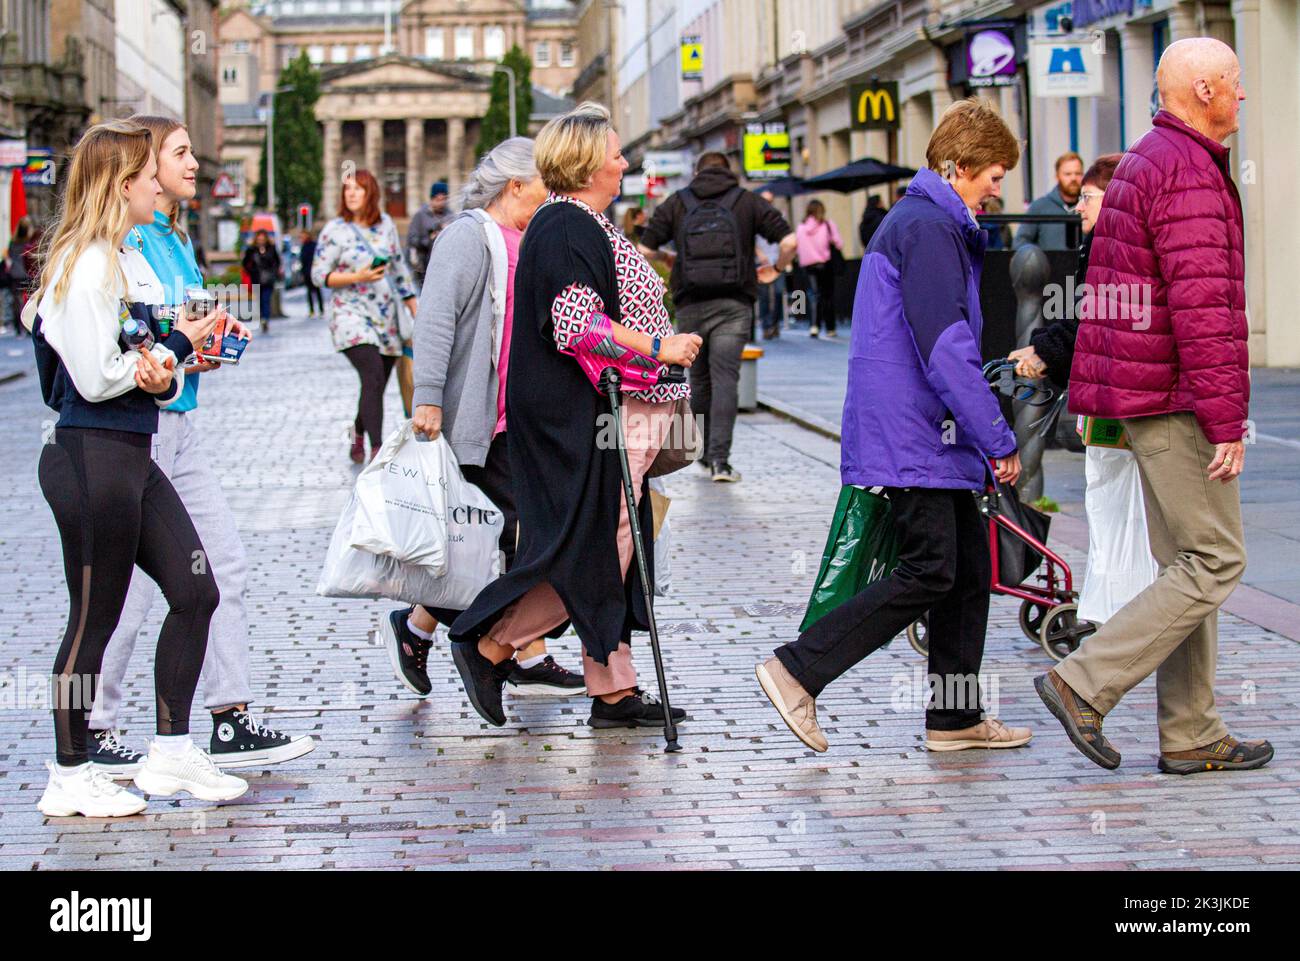 Dundee, Tayside, Scotland, UK. 27th Sep, 2022. UK Weather: Temperatures in some parts of Northeast Scotland reached 12°C on this bitterly cold Autumn day. Local trendy women are out and about shopping in Dundee city centre in late September, albeit cautiously due to the high cost of living. Credit: Dundee Photographics/Alamy Live News Stock Photo